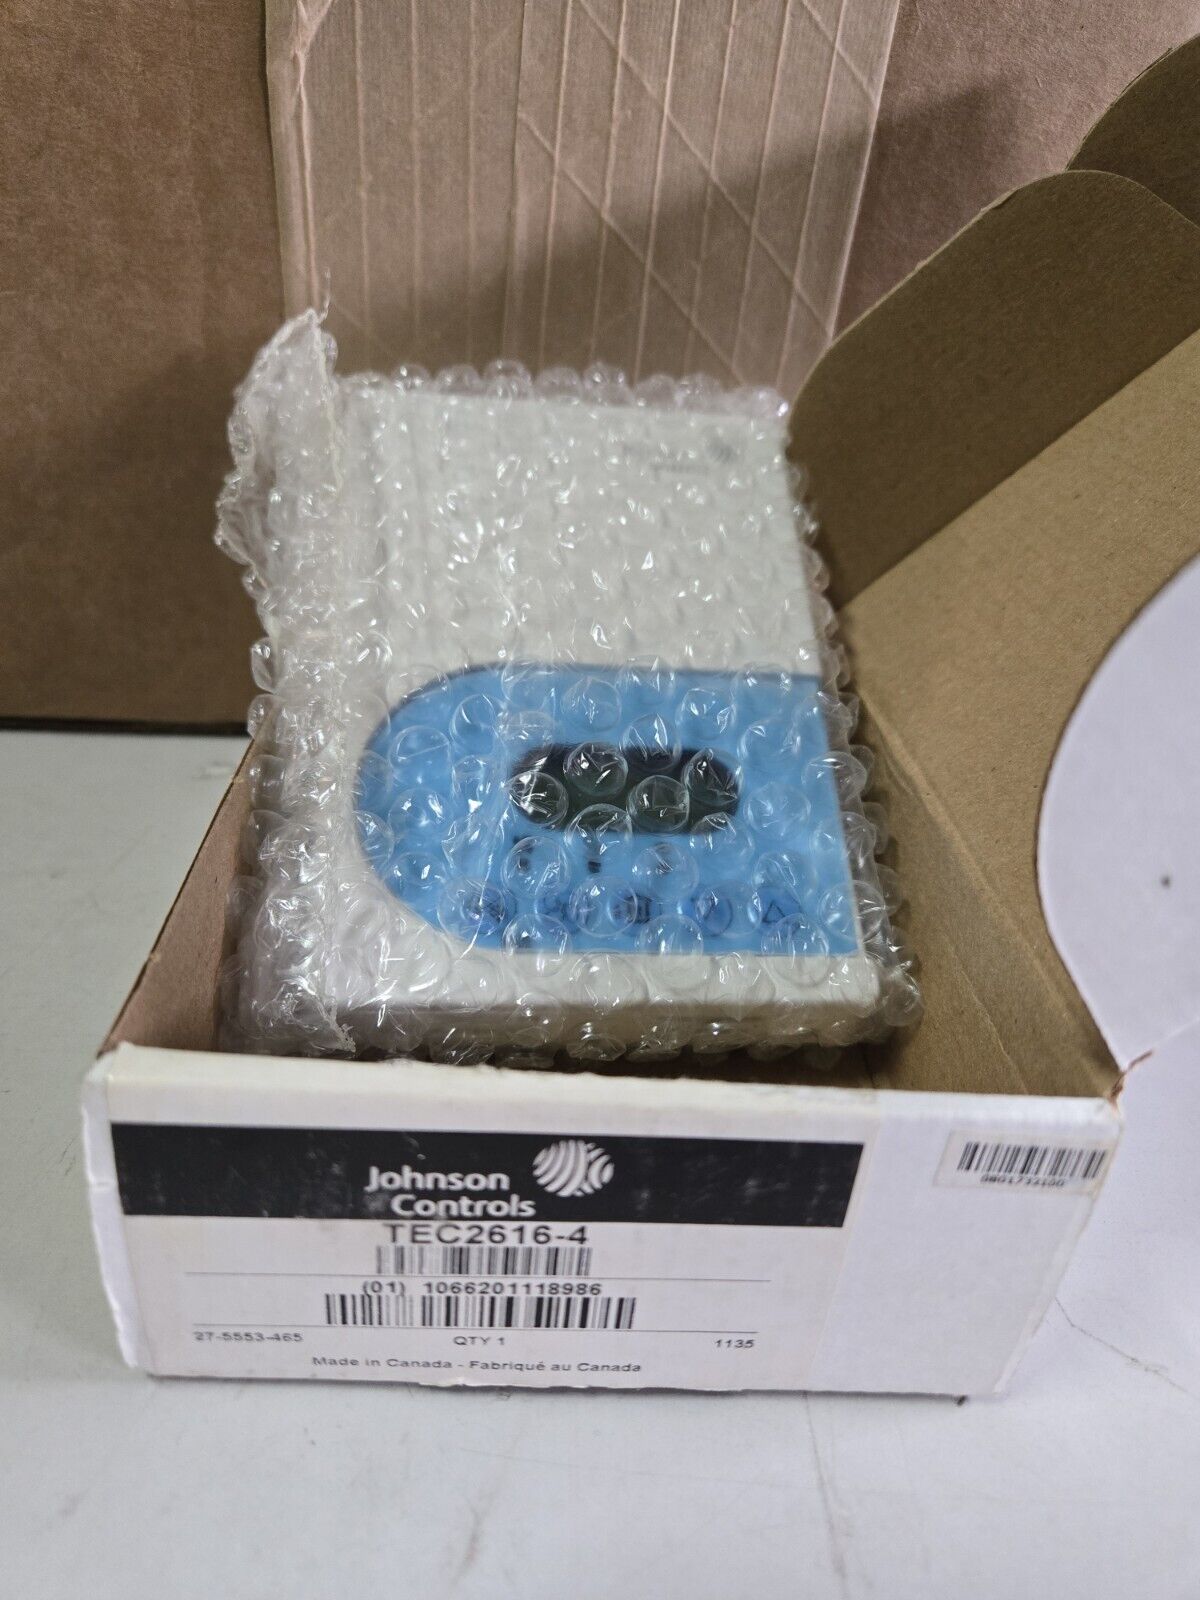 *New in Box* Johnson Controls TEC2616-4 Zone Thermostat BACnet MS/TP